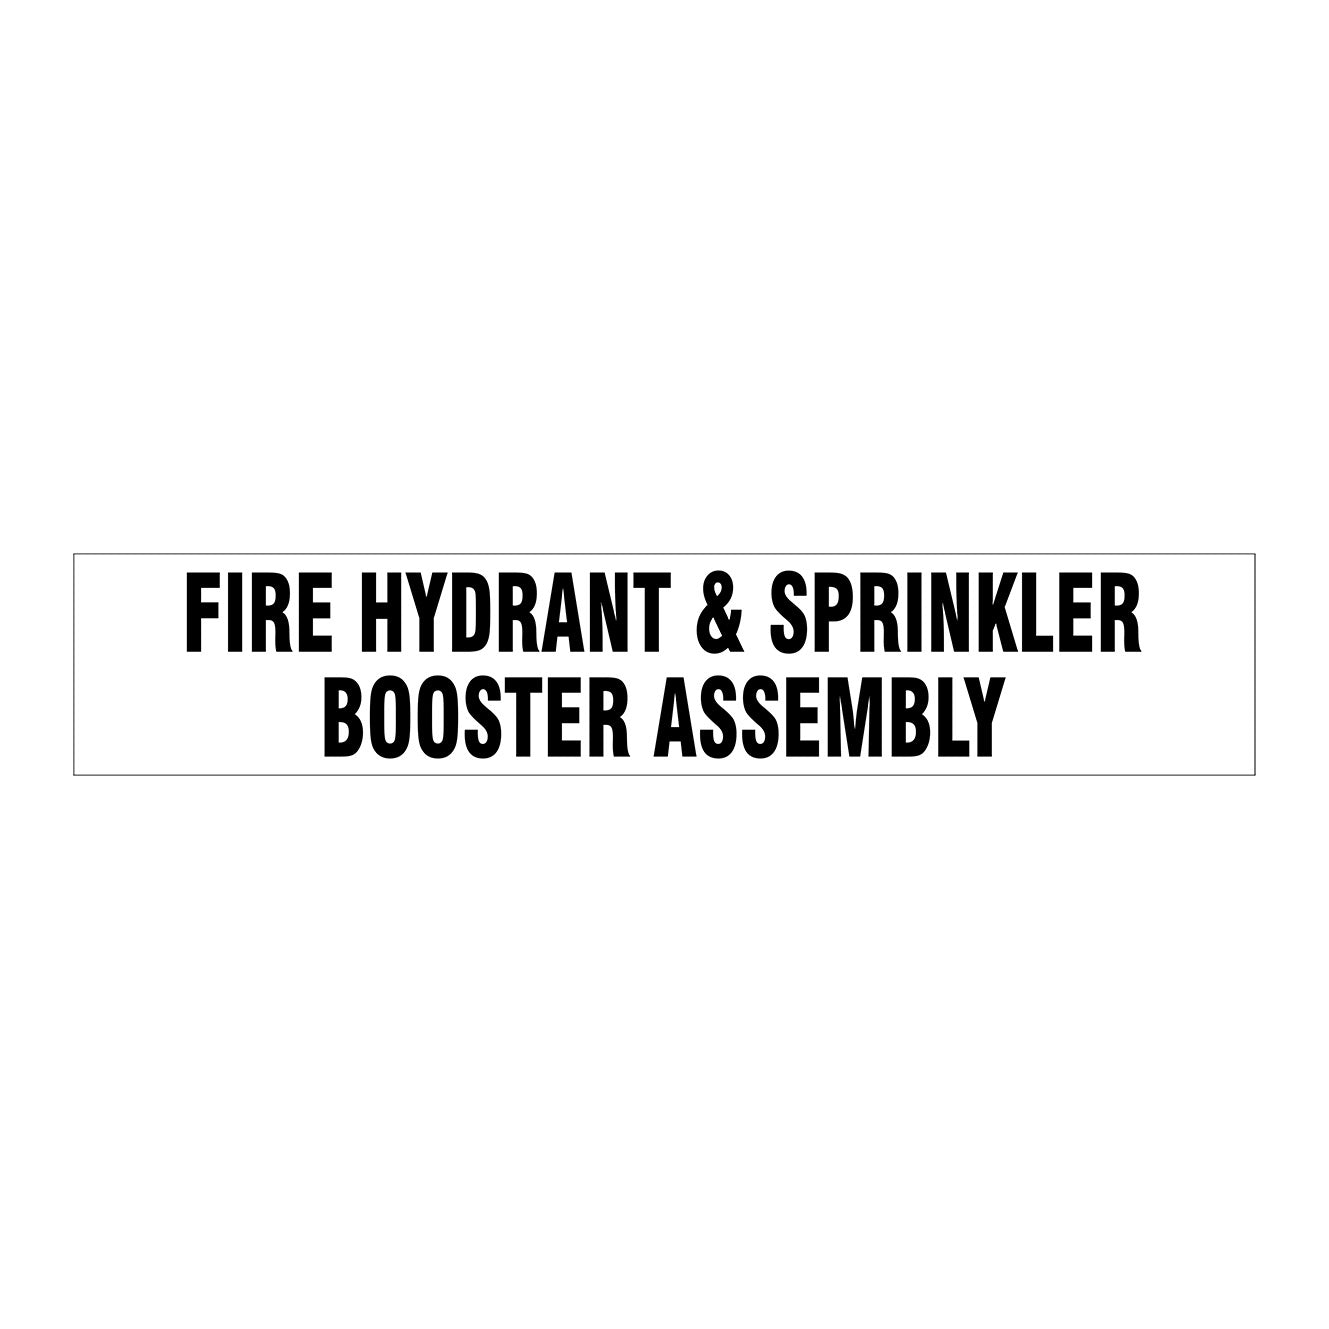 FIRE HYDRANT & SPRINKLER BOOSTER ASSEMBLY SIGN